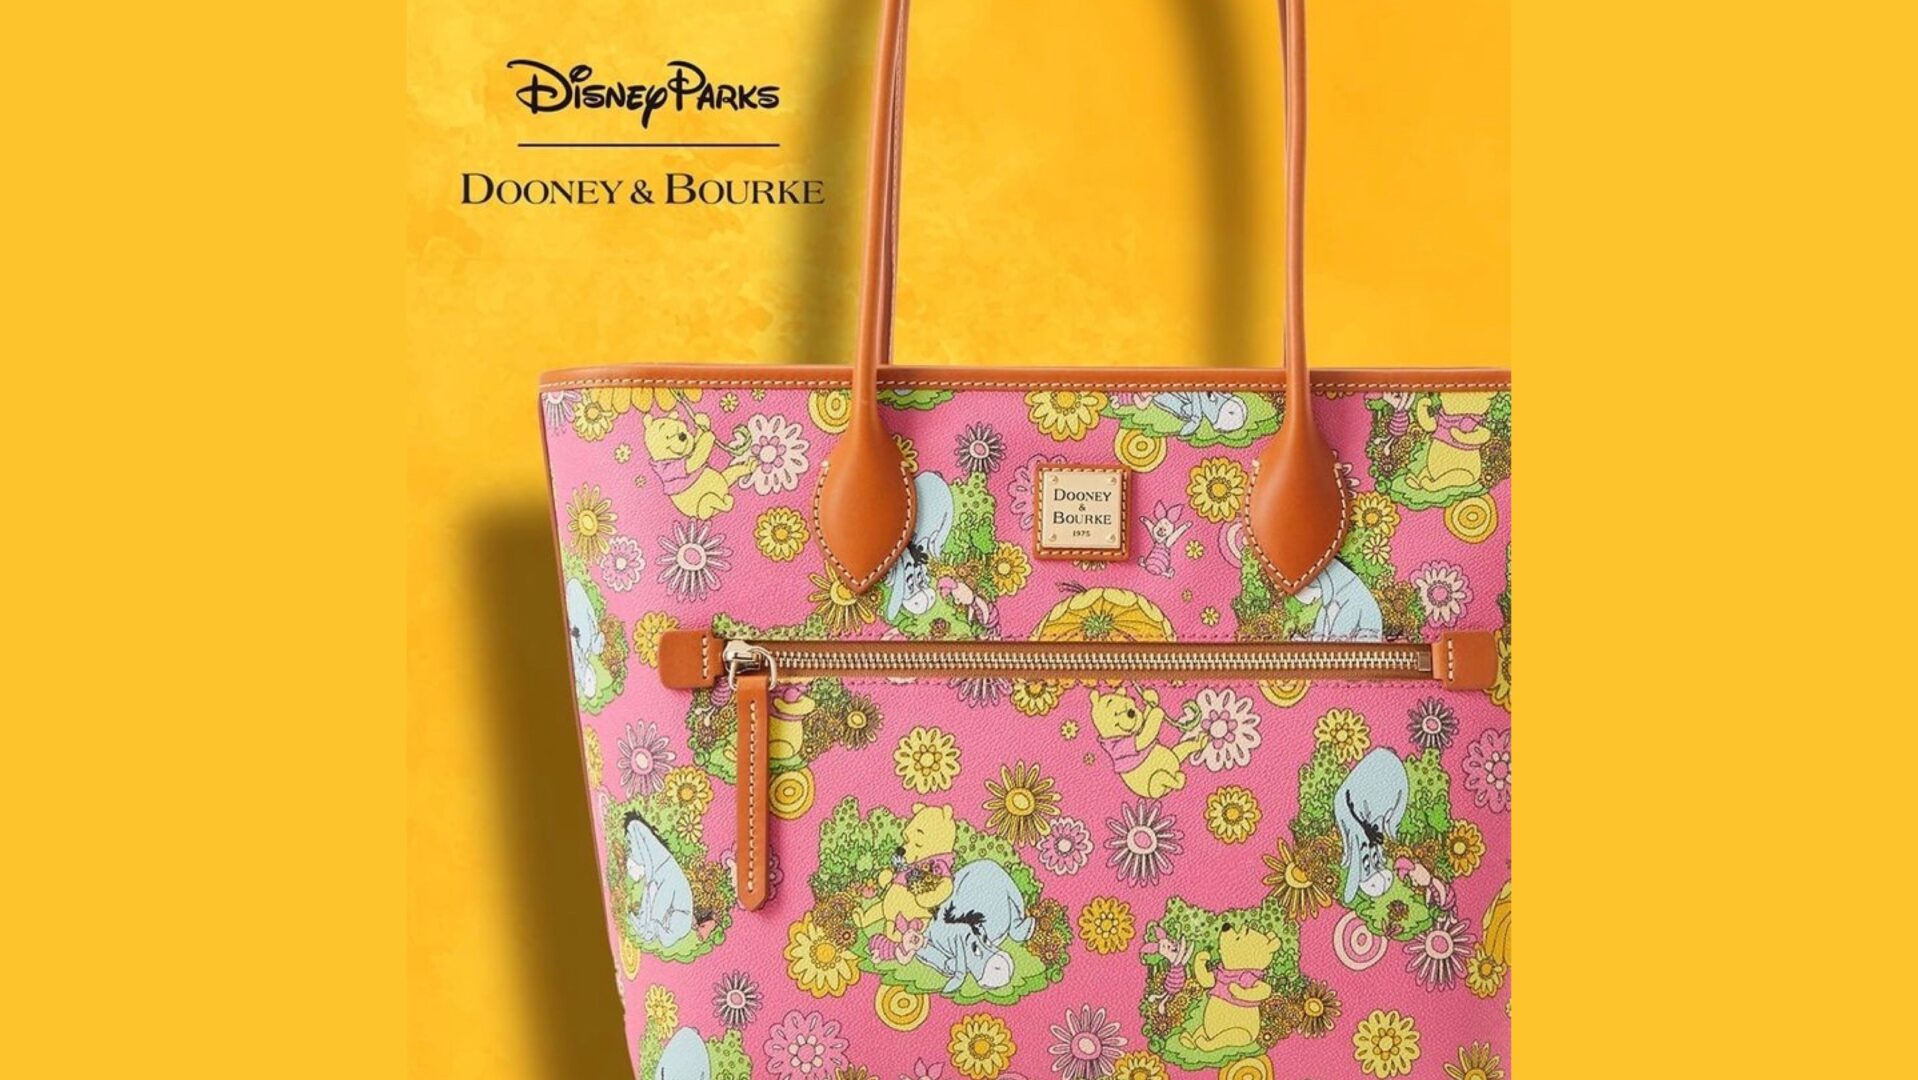 New Winnie The Pooh Dooney & Bourke Collection Coming Soon To shopDisney!